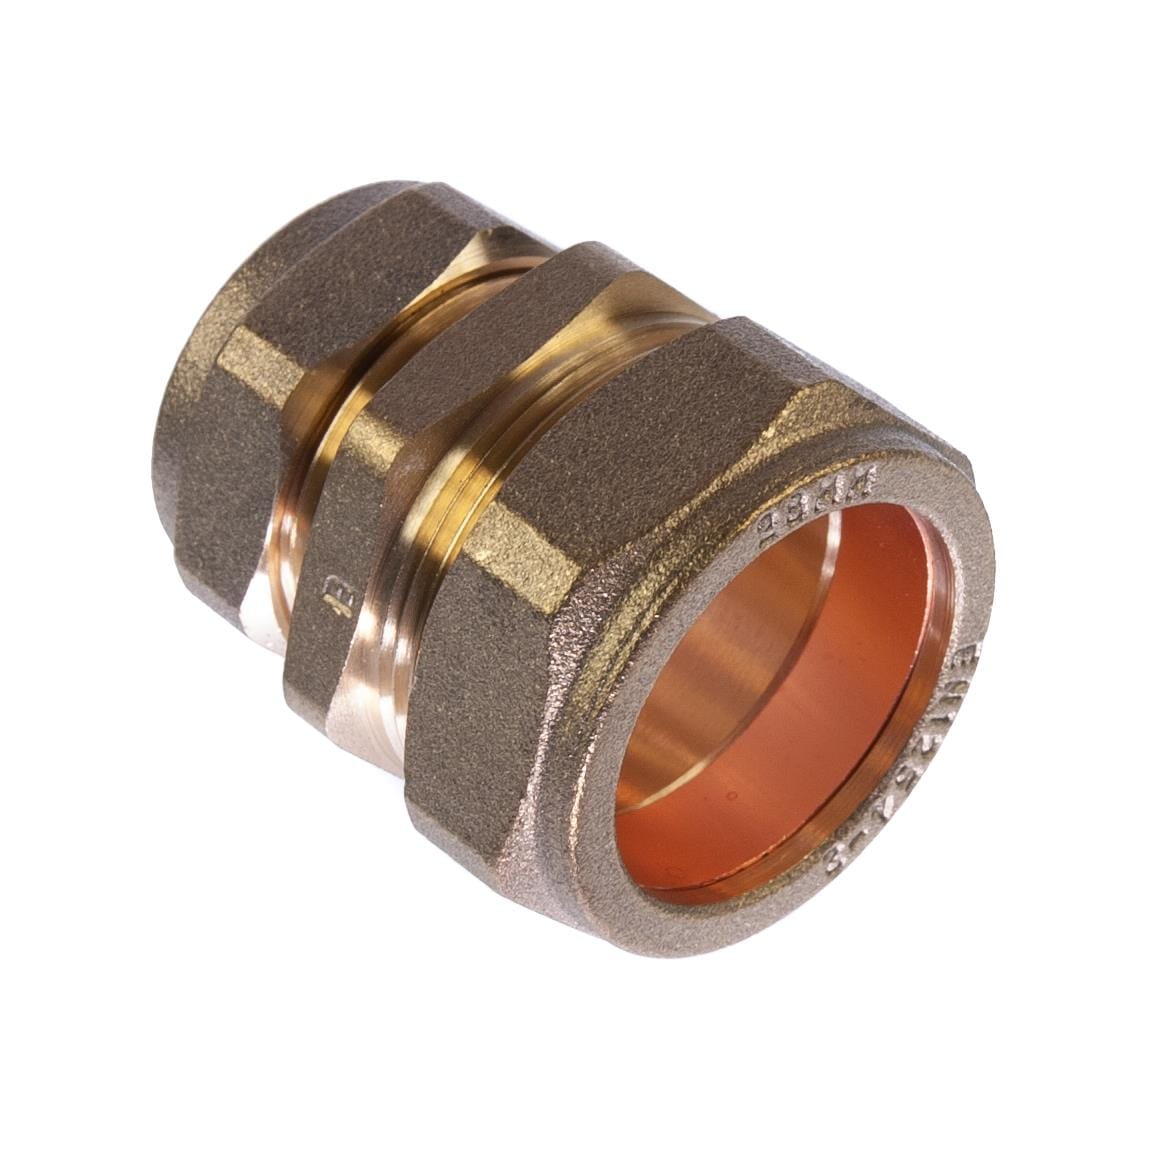 28mm x 22mm Compression Reducer Coupling Brass Compression Reducing Couplings Thunderfix 100107